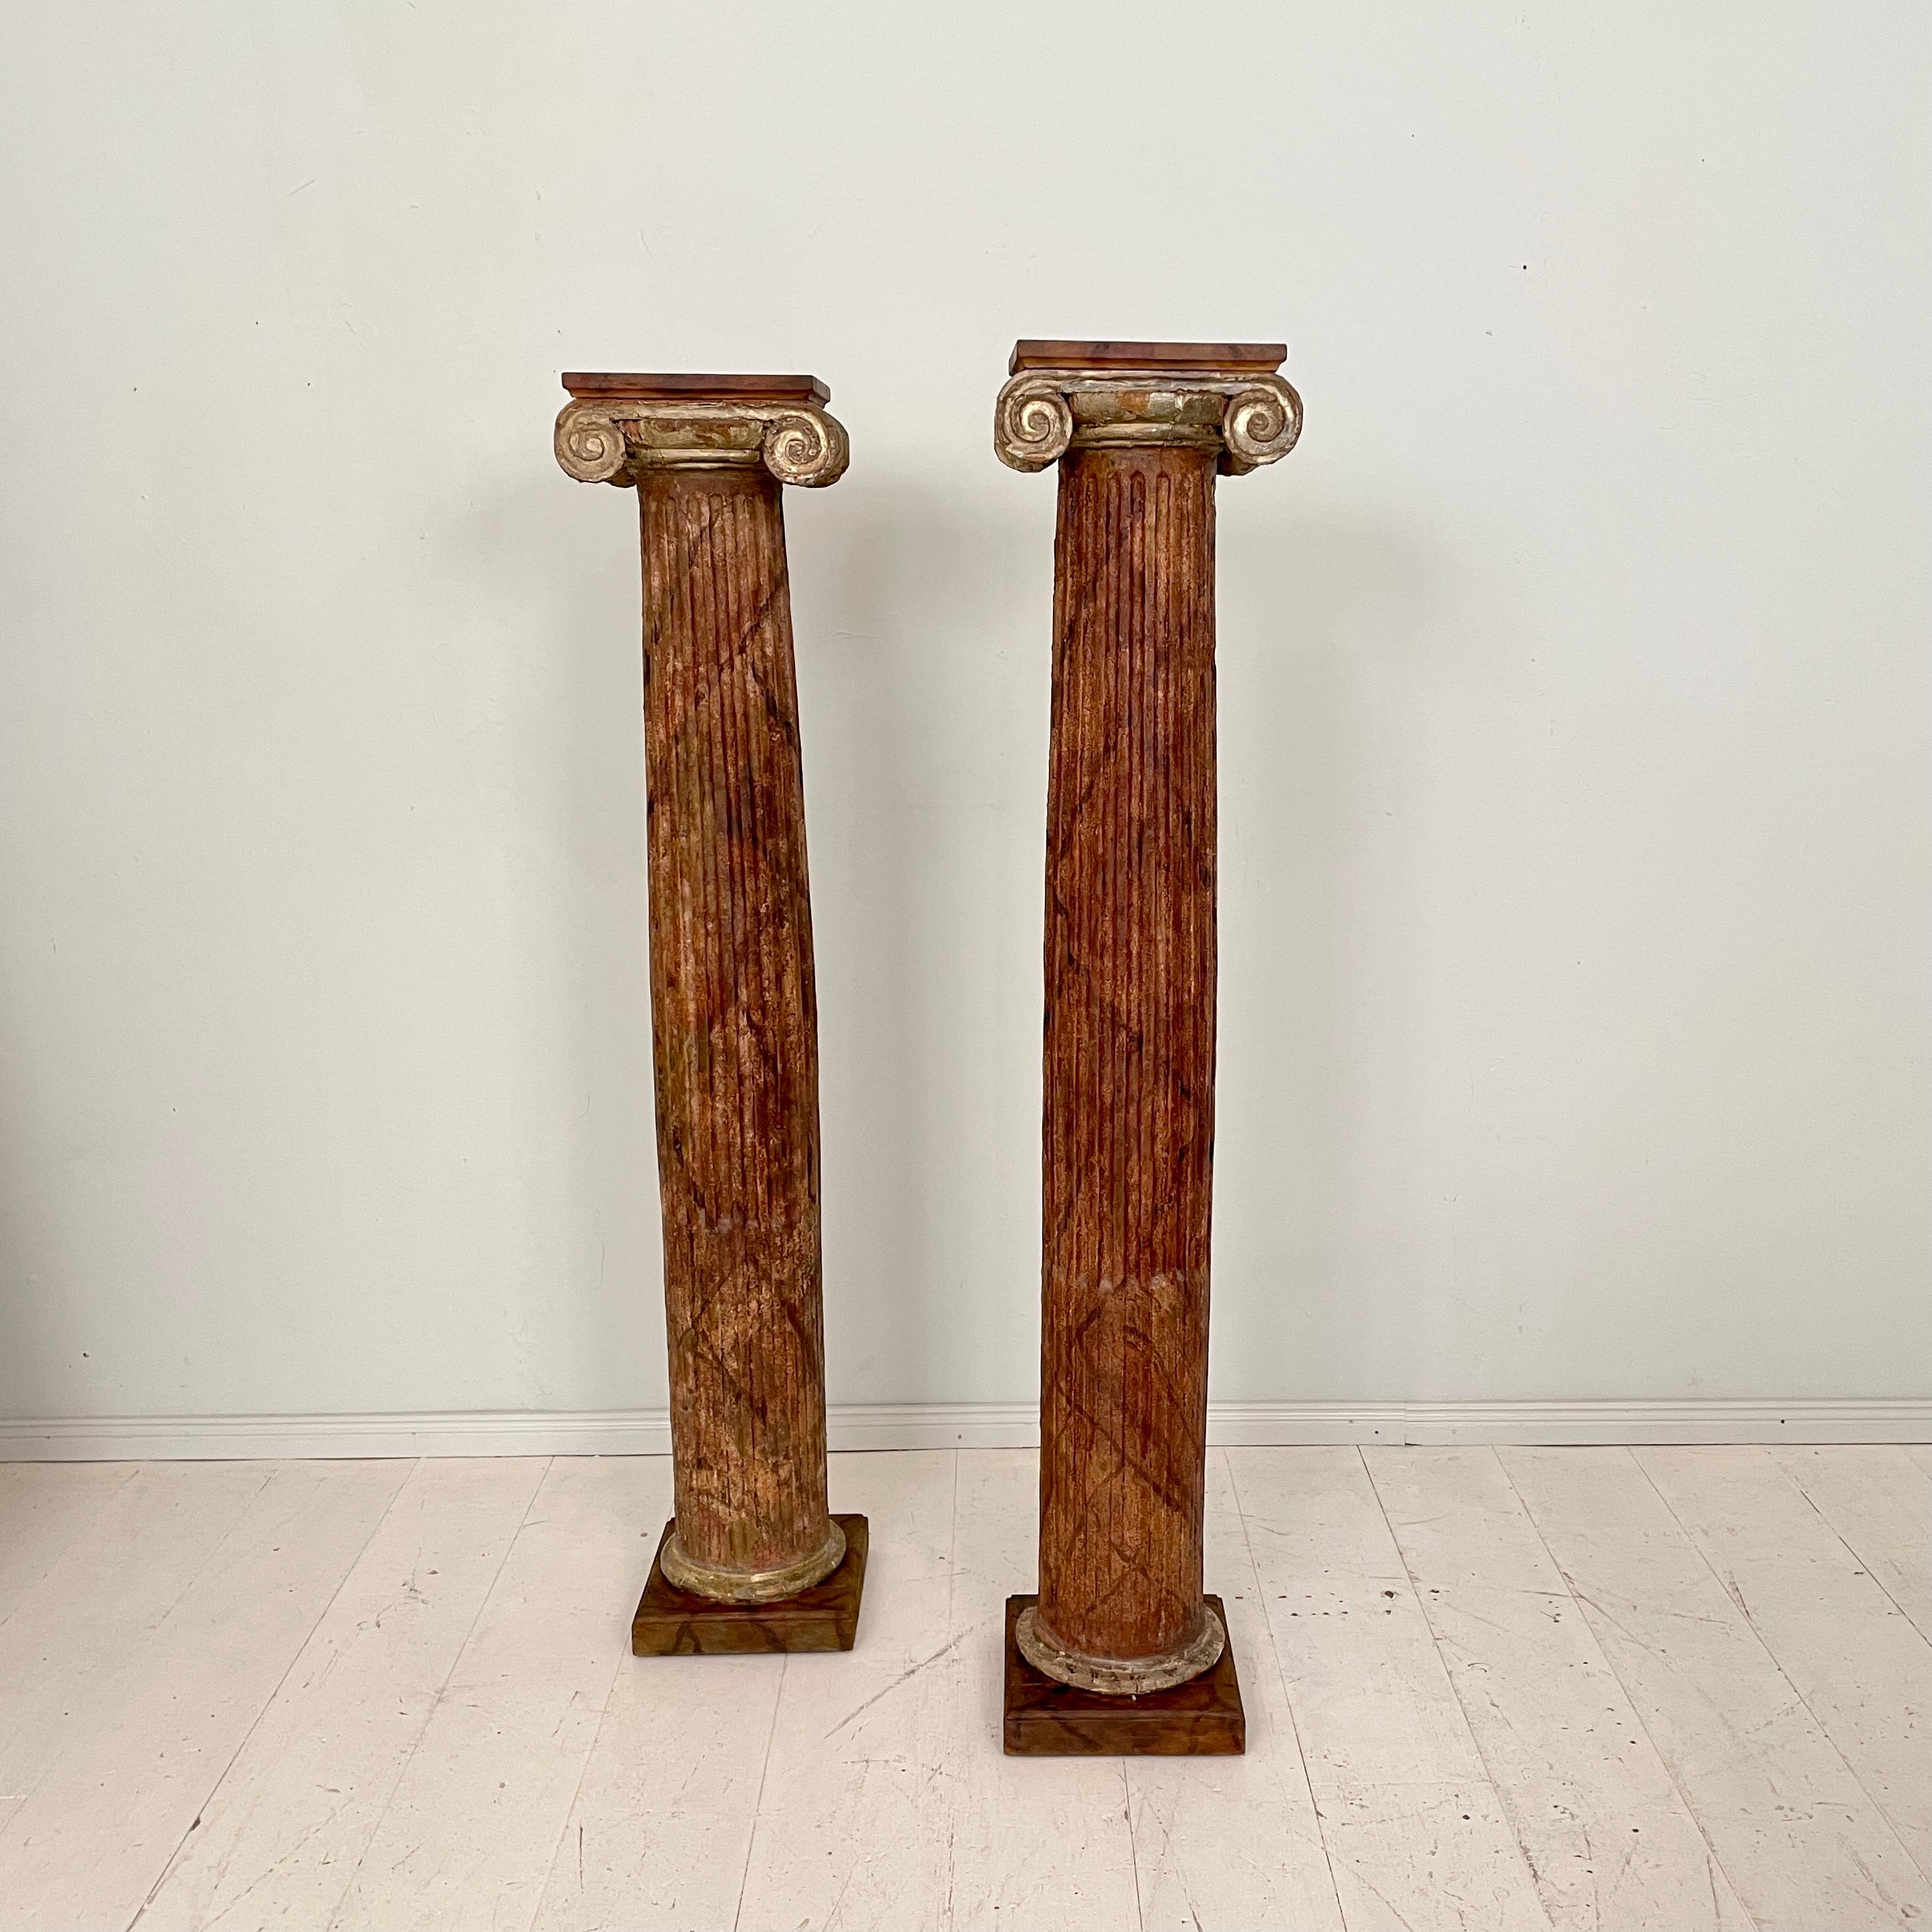 Hand-Painted Early 19th Century Pair of Wood Columns Lacquered in Faux Marble, Around 1800 For Sale